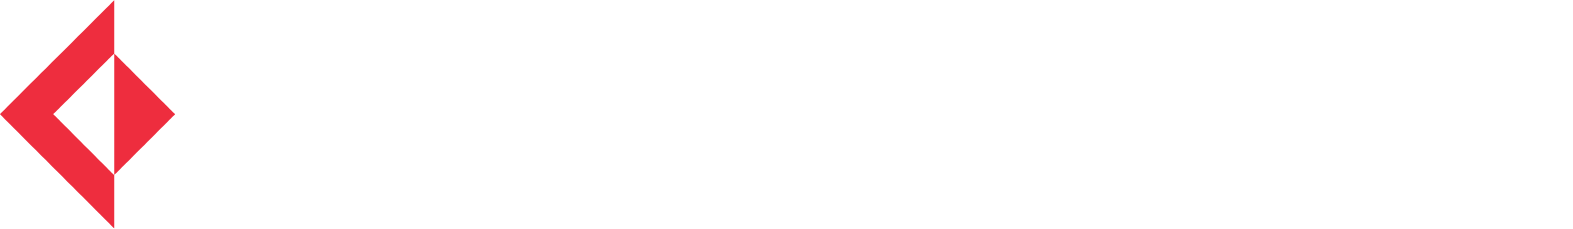 Cosmo First logo grand pour les fonds sombres (PNG transparent)